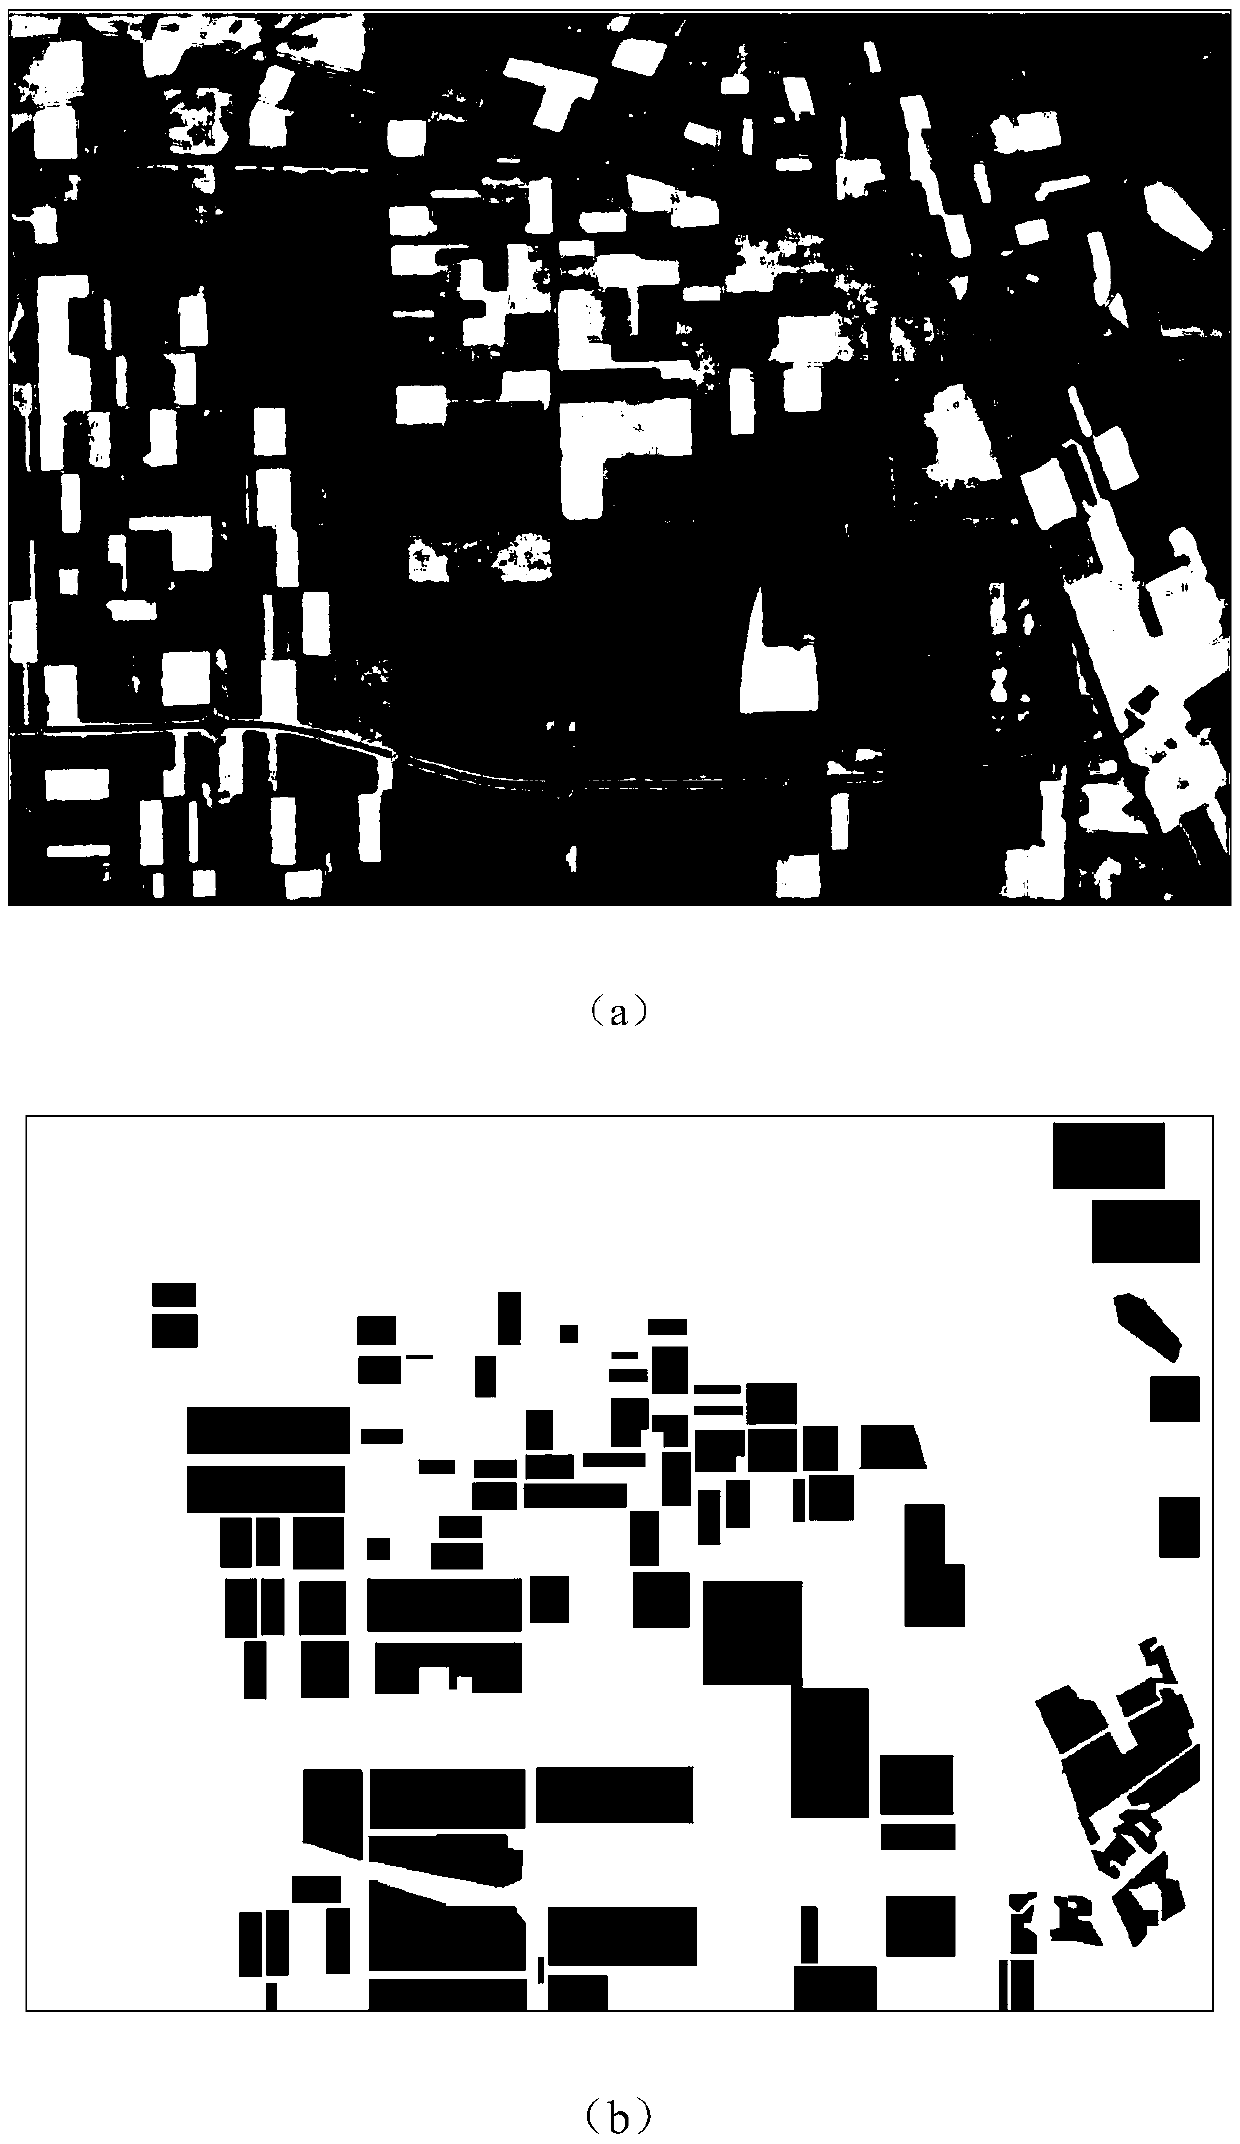 Polarization SAR Image Classification Method Based on Scattered Energy and Stack Autoencoder